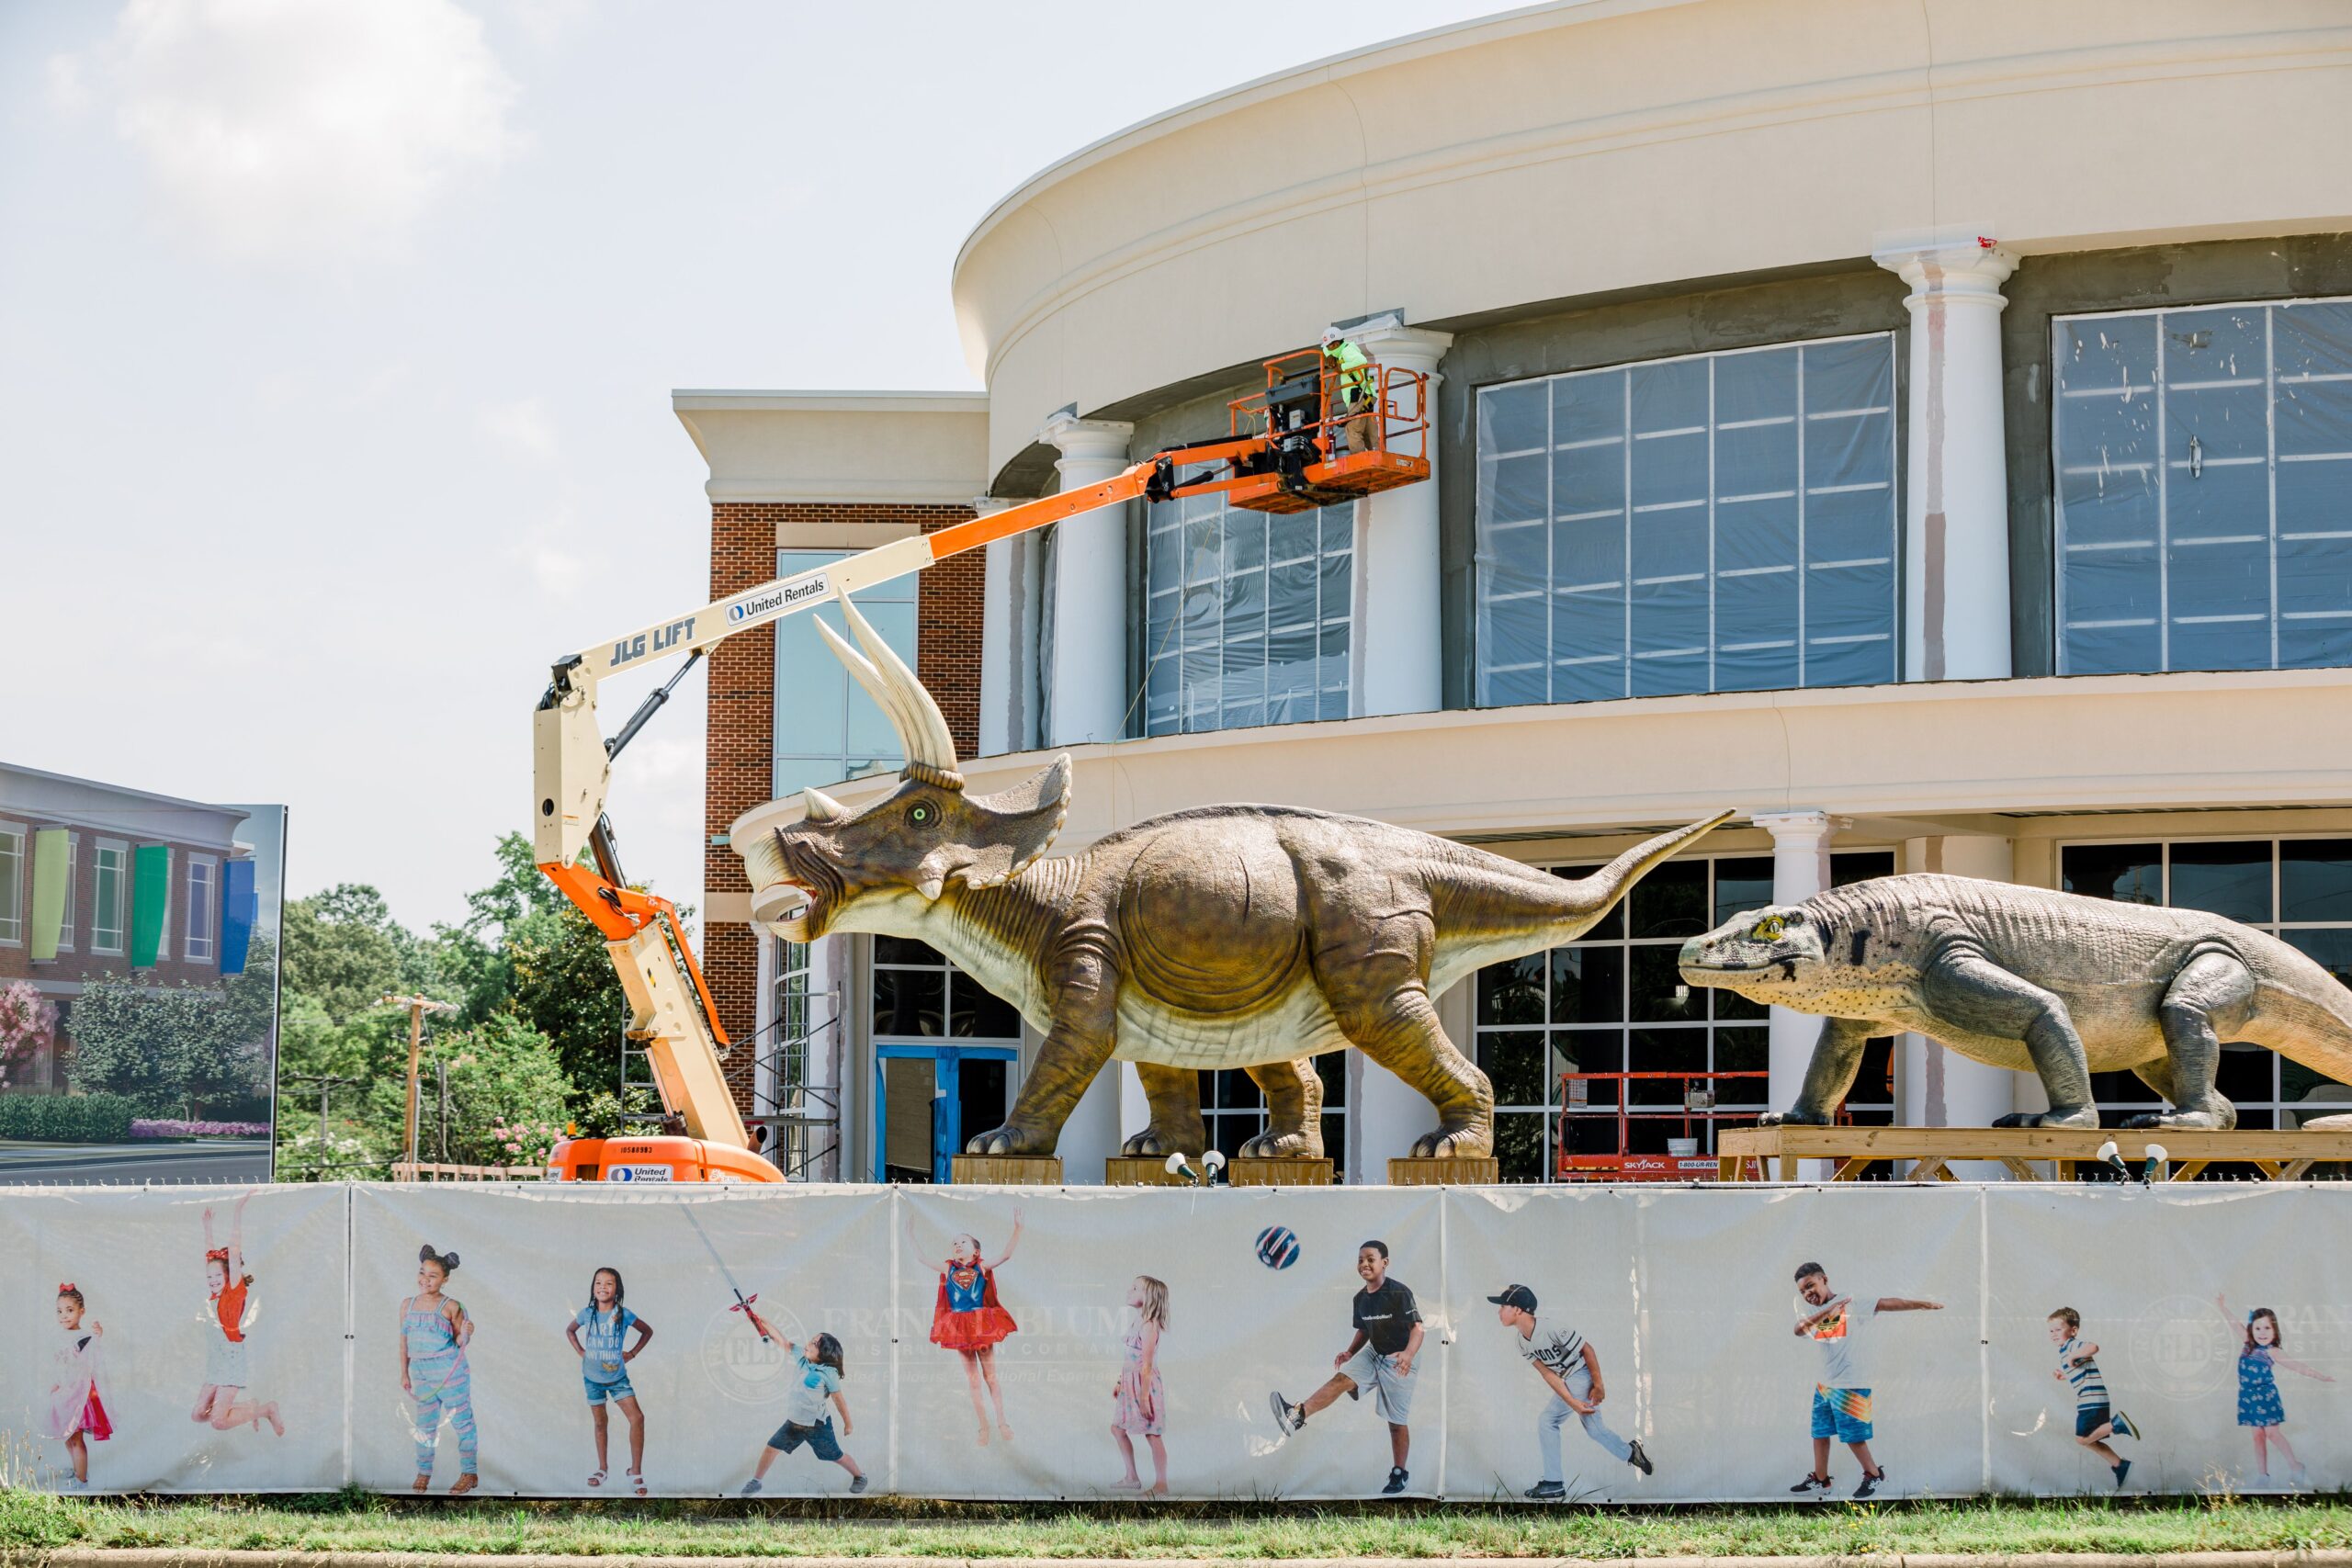 The exterior of the Nido & Mariana Qubein Children's Museum in High Point, NC, with construction happening around it.